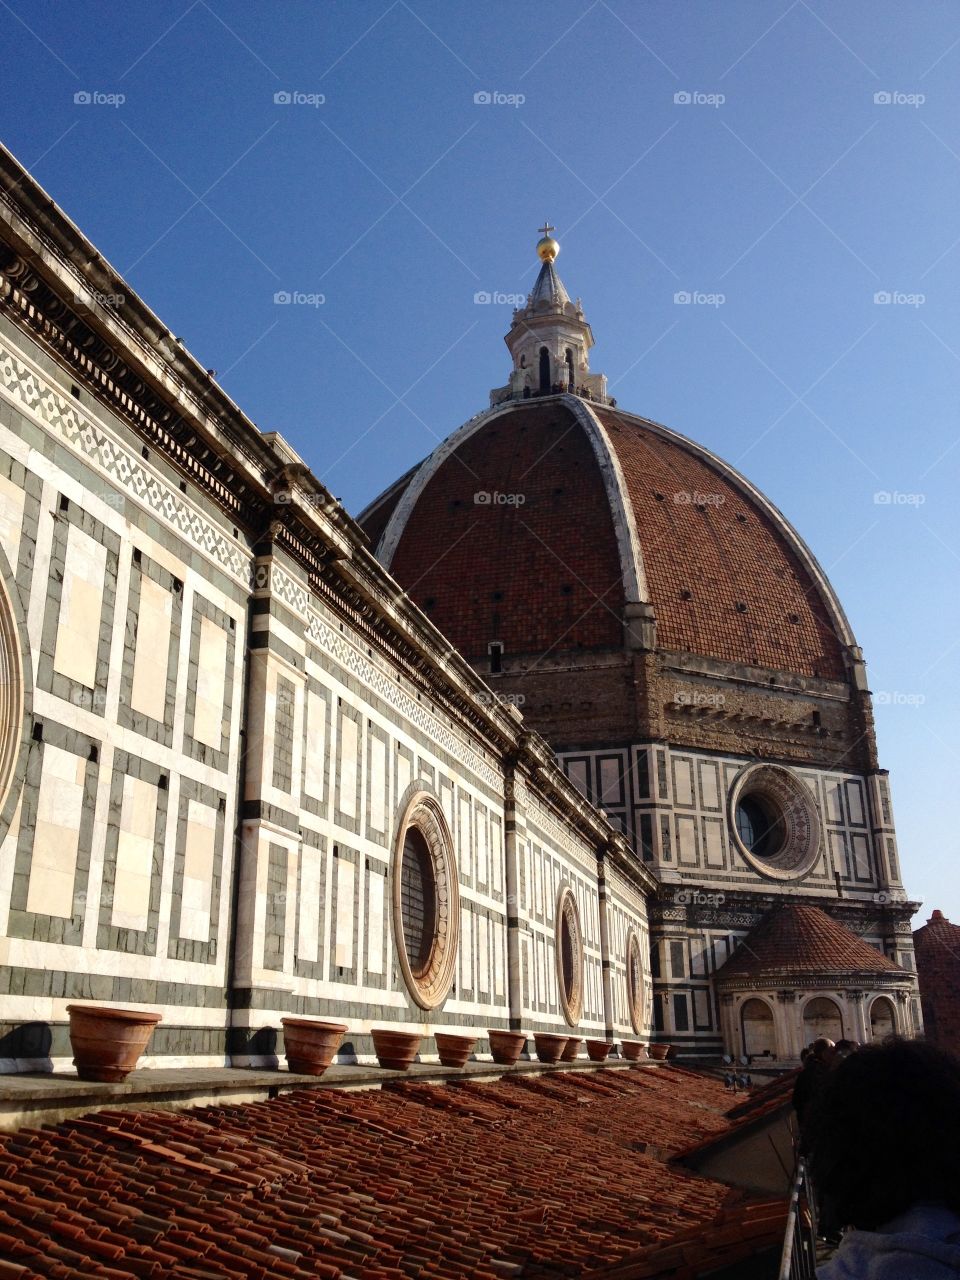 The dome of Florence cathedral